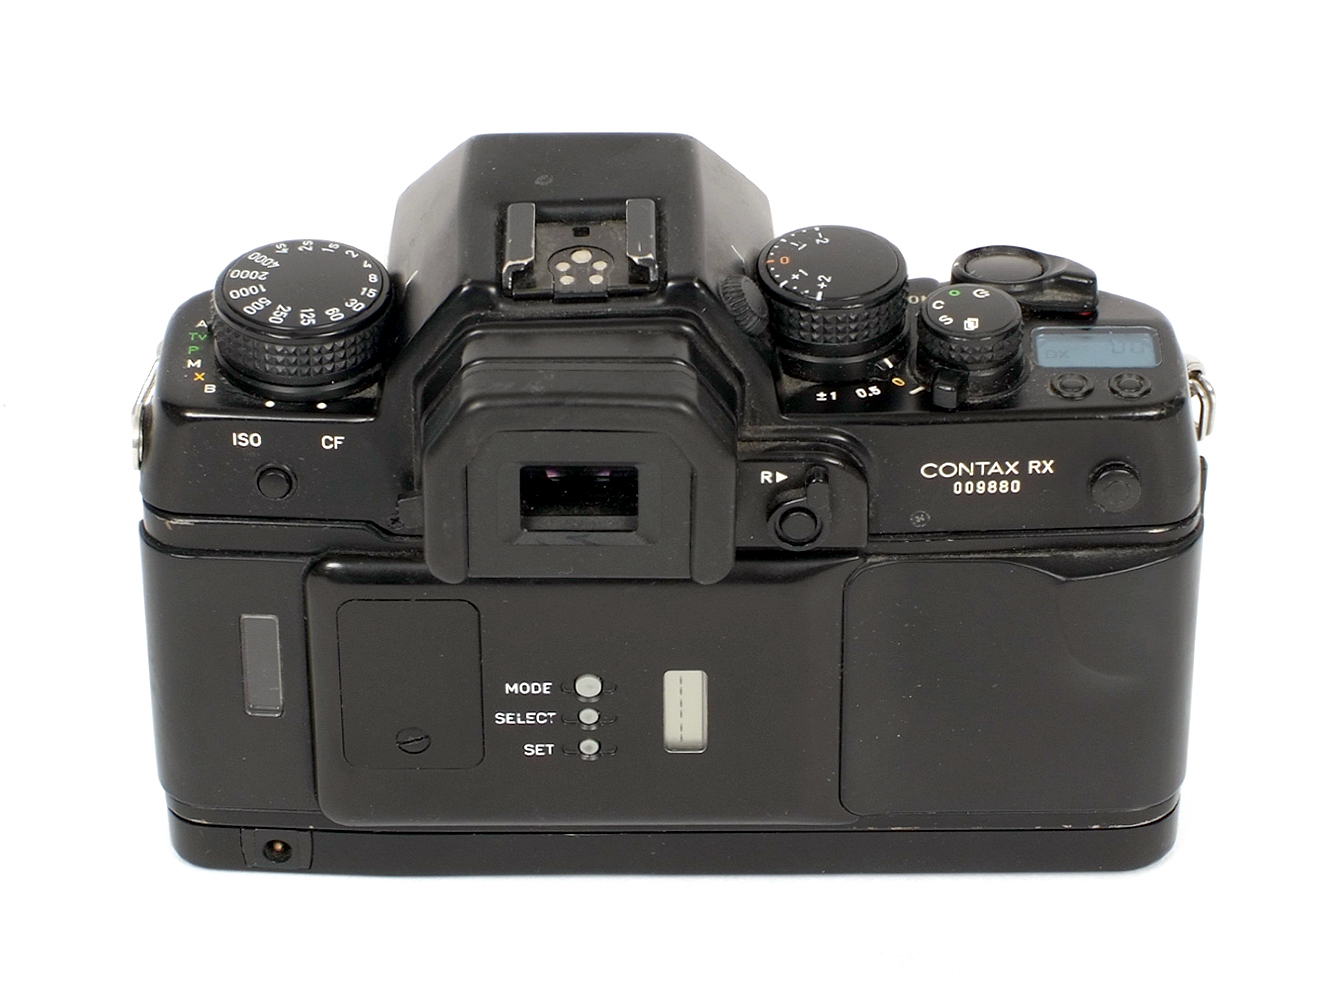 Contax RX 35mm SLR Body. #009880 with CZ Planar 50mm f1.7 lens (condition 5/6F). - Image 3 of 3